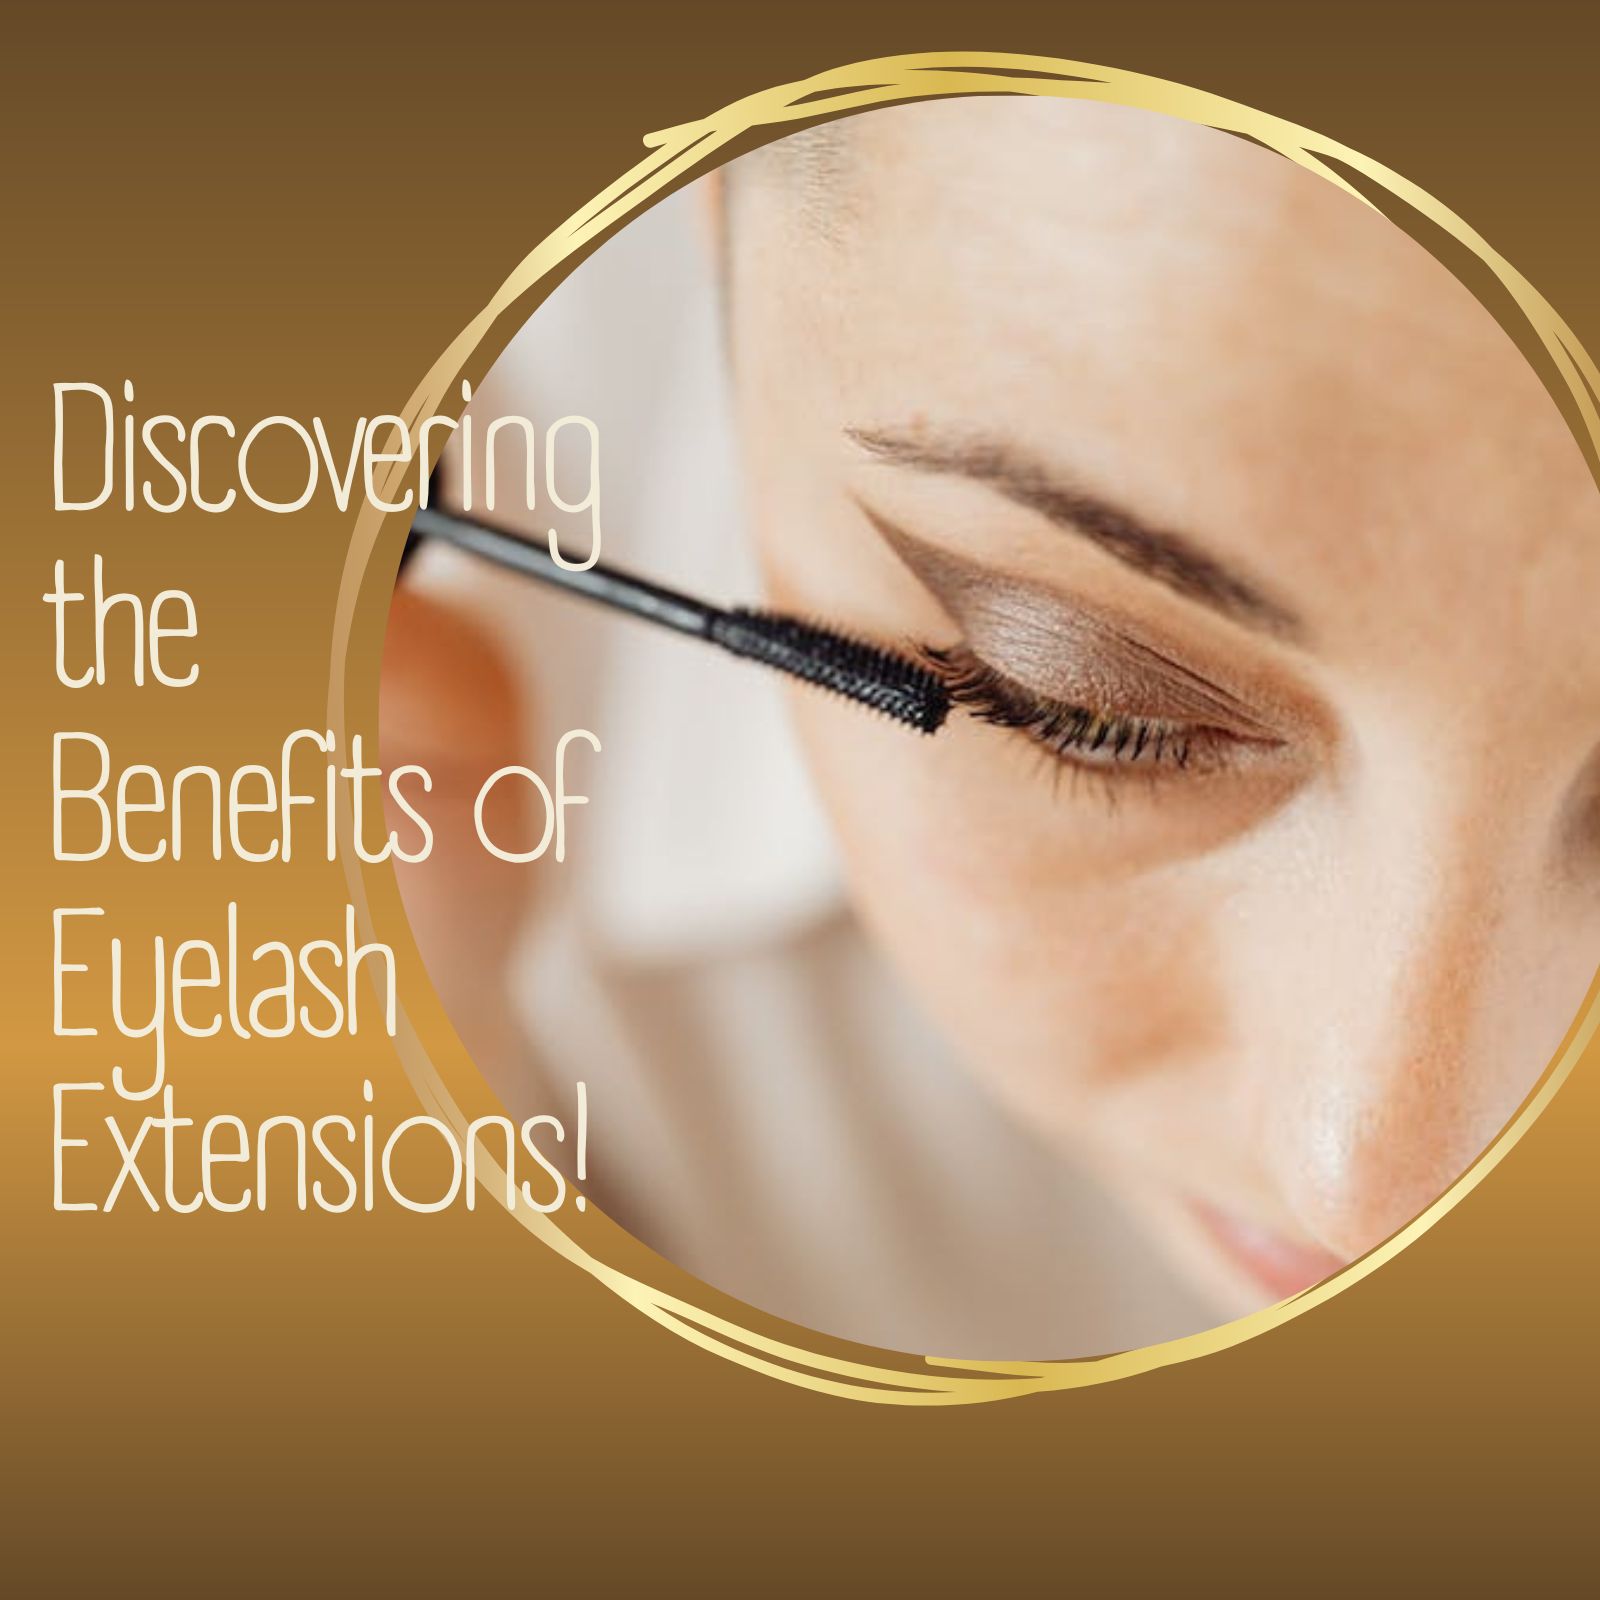 Discovering the Benefits of Eyelash Extensions!